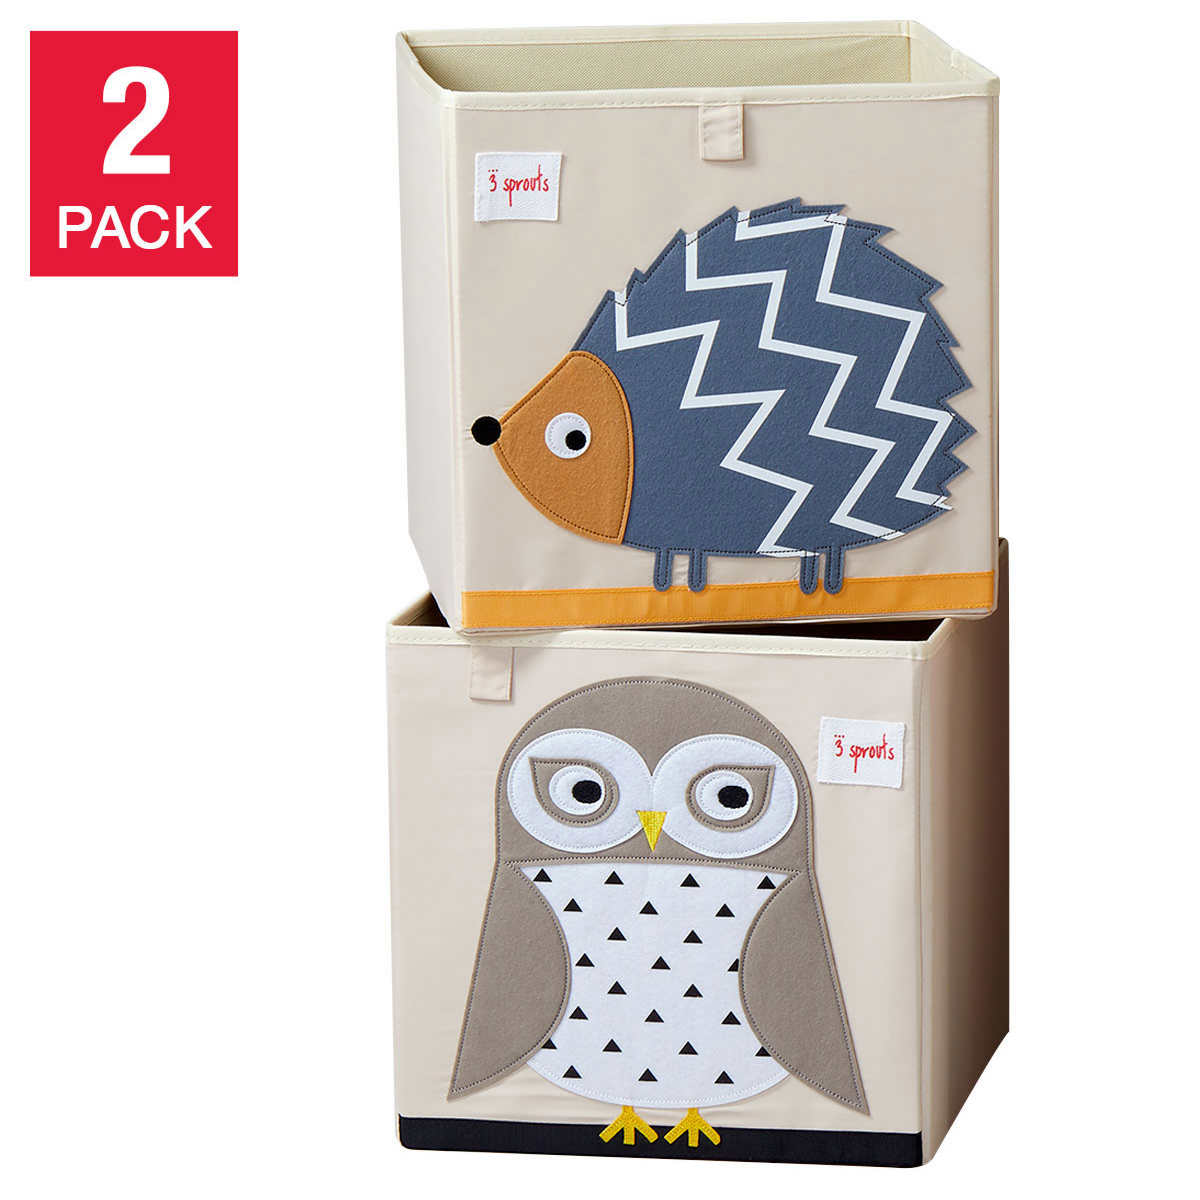 3 Sprouts Storage Boxes, Hedgehog & Owl, 2-pack